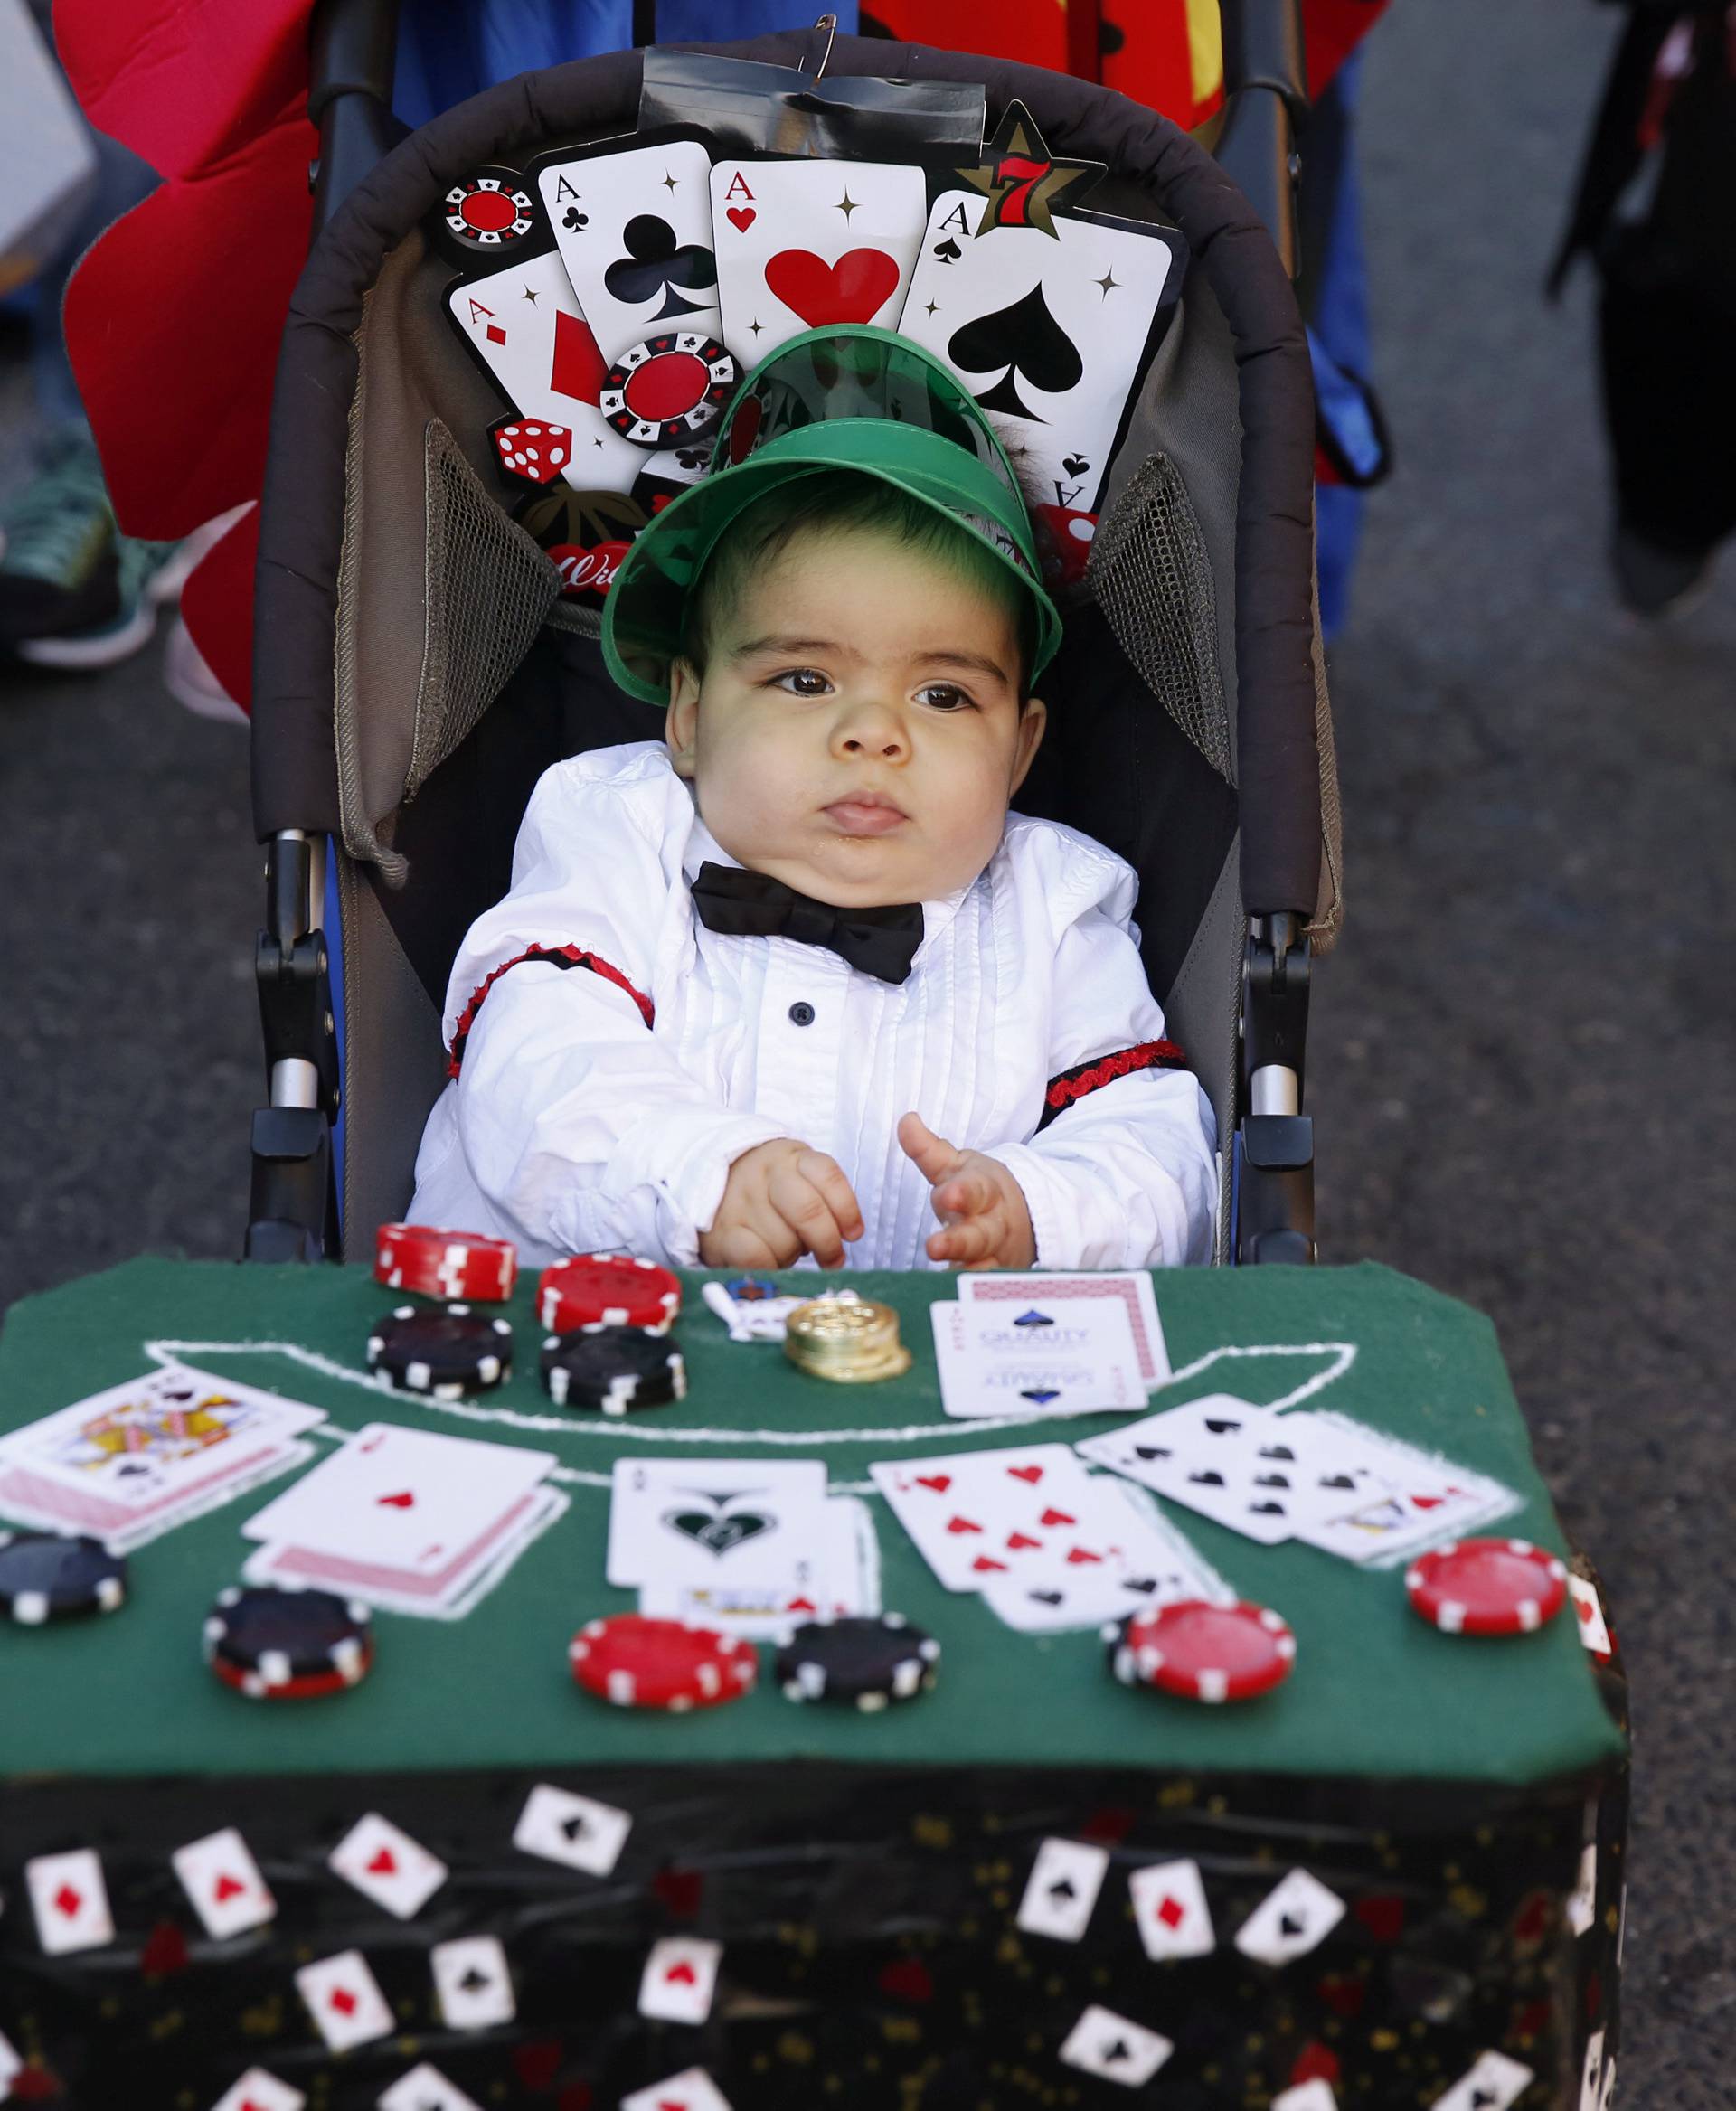 A young child takes part in the Hoboken Ragamuffin Parade to celebrate Halloween in Hoboken, New Jersey 